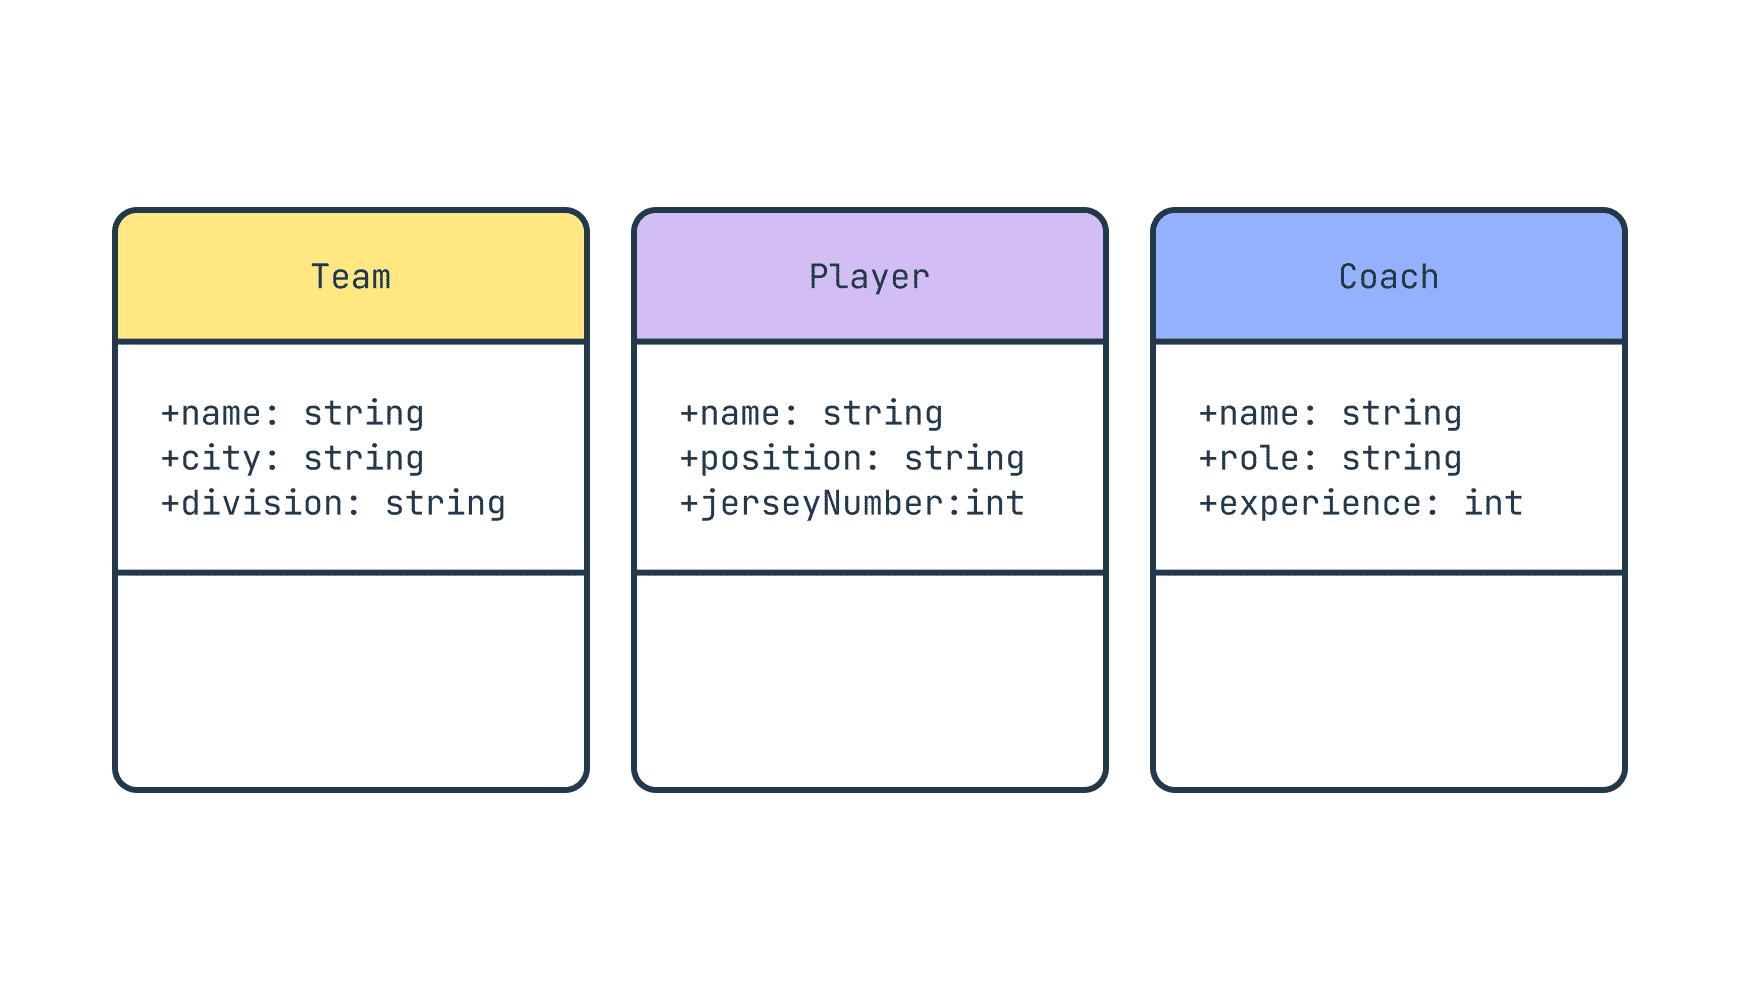 3 rectangles used to depict classes in a UML class diagram, with classes and attributes filled in